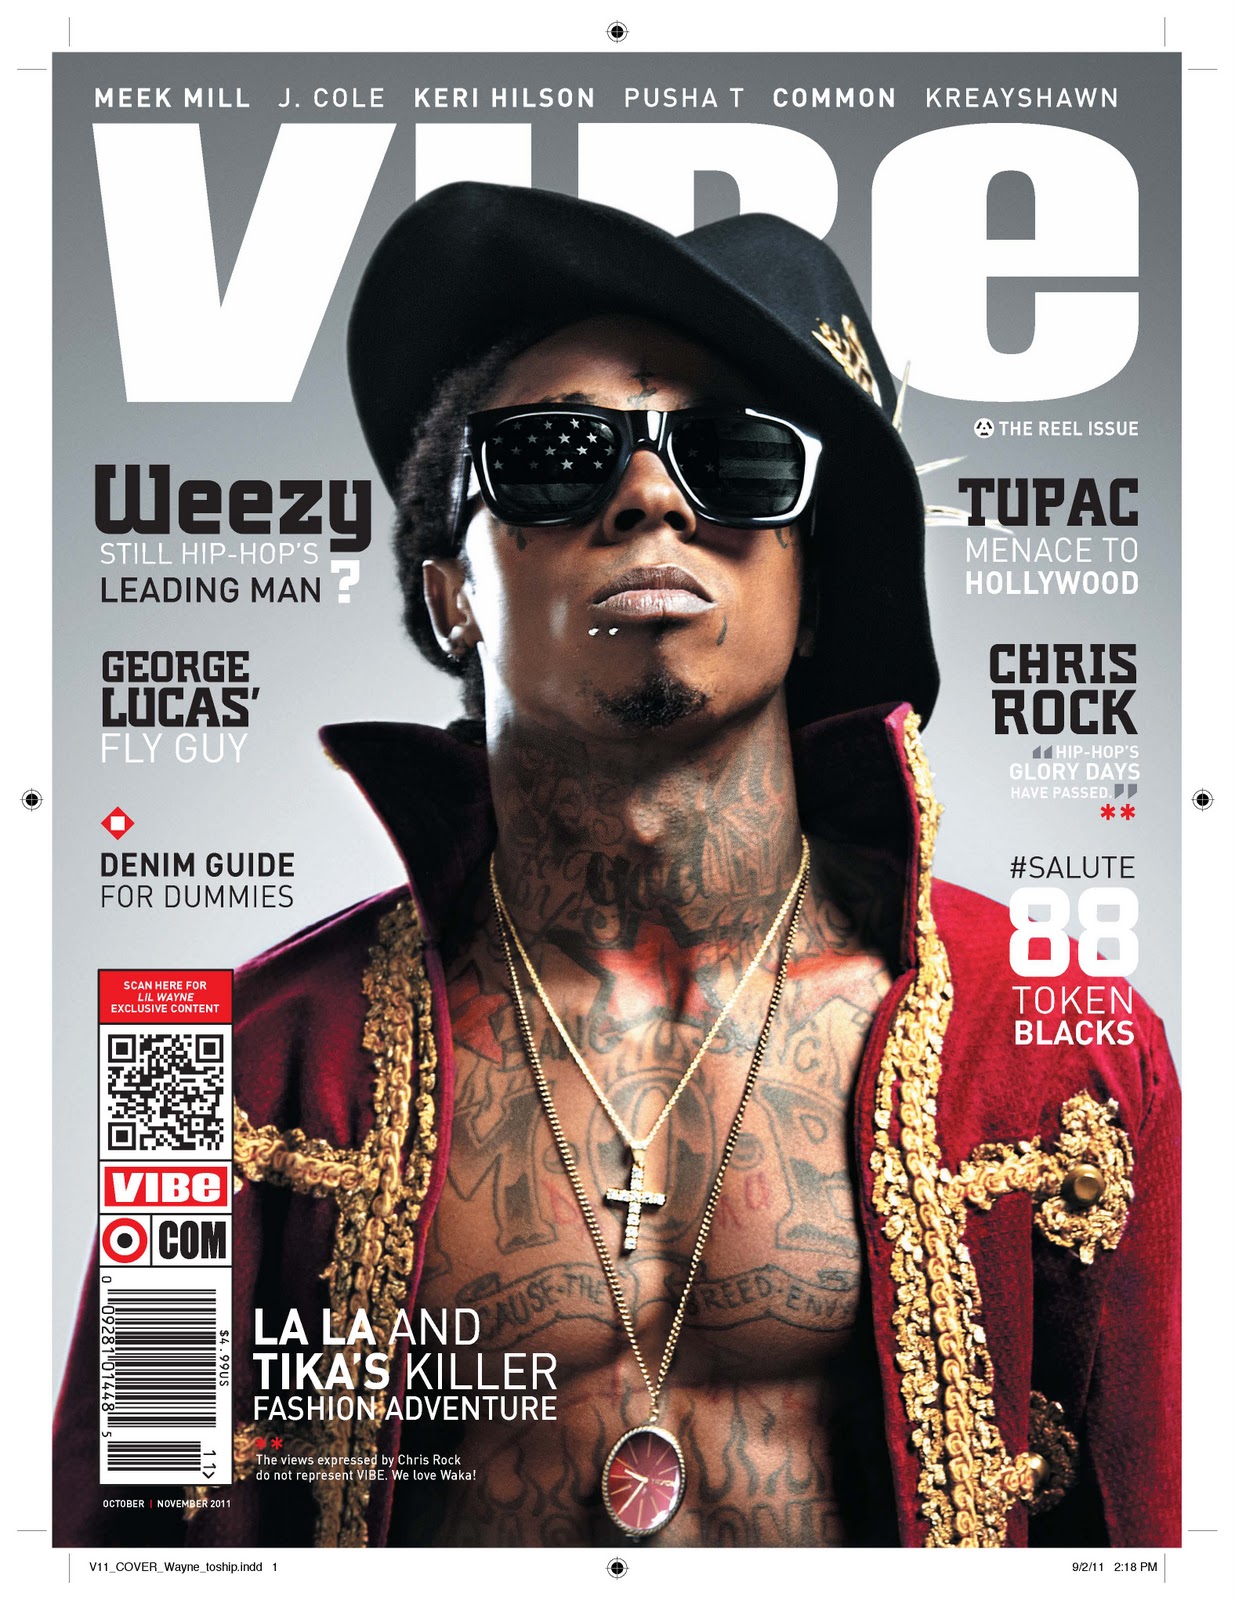 Lil Wayne covers this months